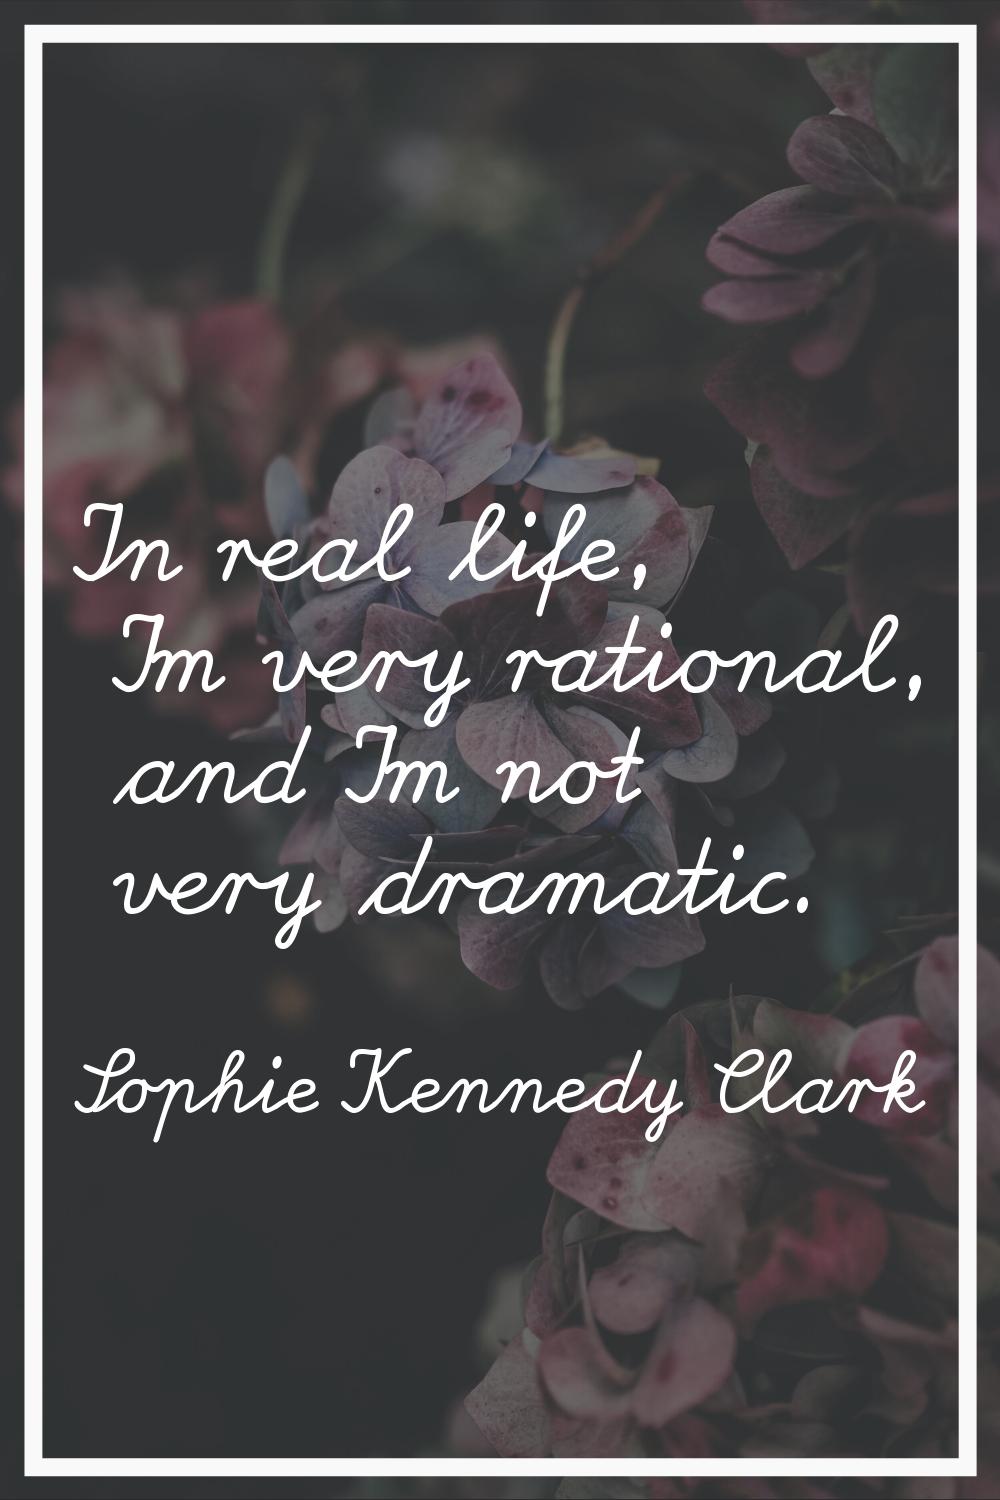 In real life, I'm very rational, and I'm not very dramatic.